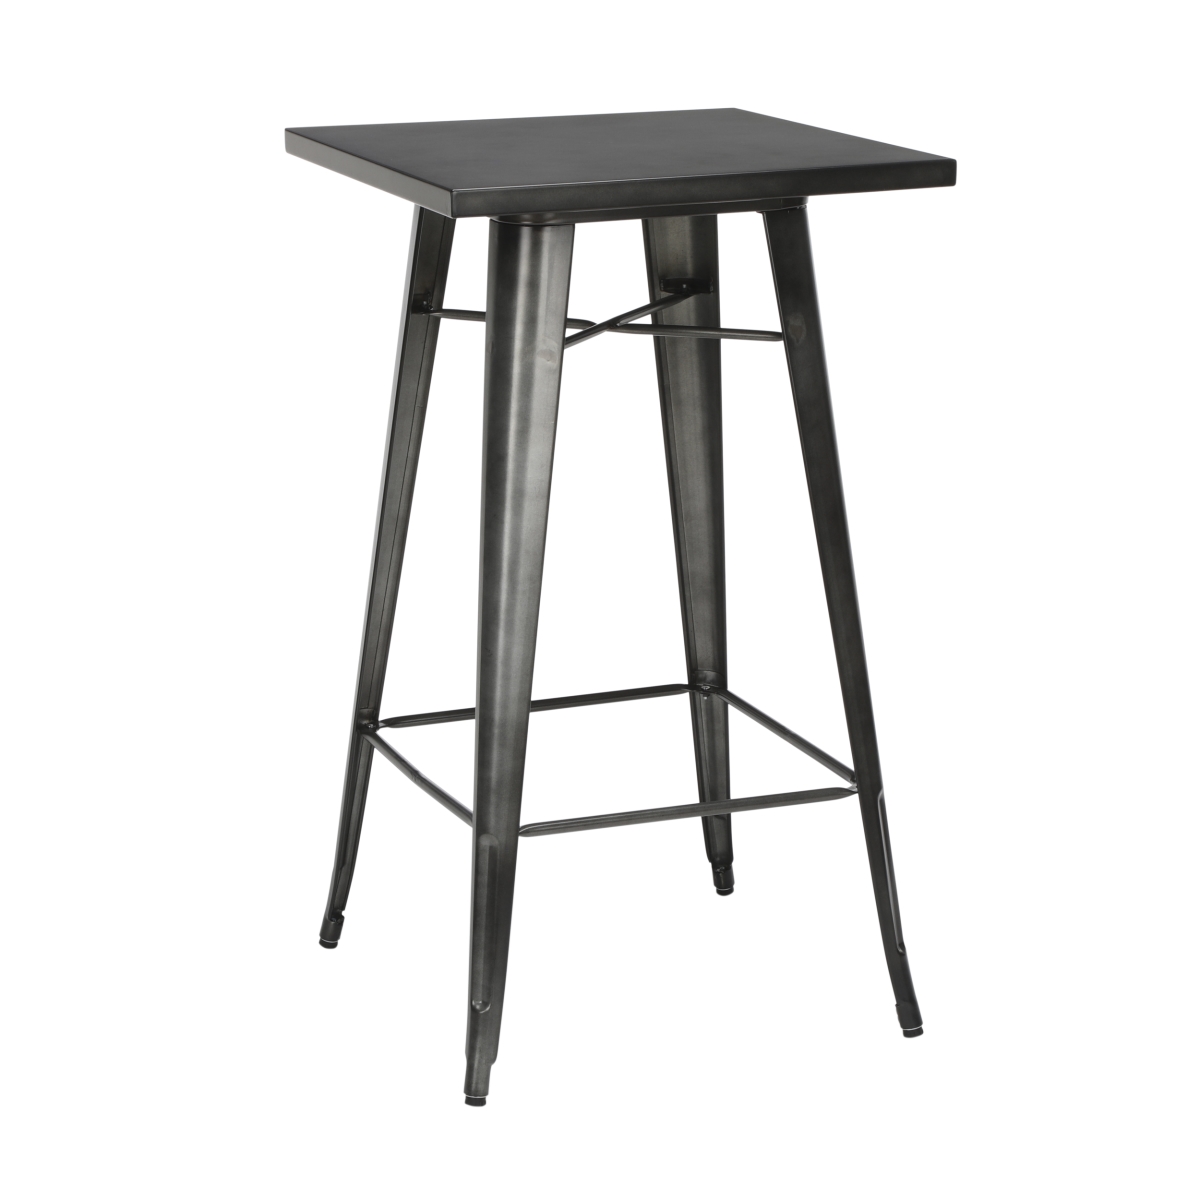 161-bt24-gm 24 In. 161 Collection Industrial Modern Square Bar Table With Footring, Galvanized Steel Indoor & Outdoor Table - Gunmetal